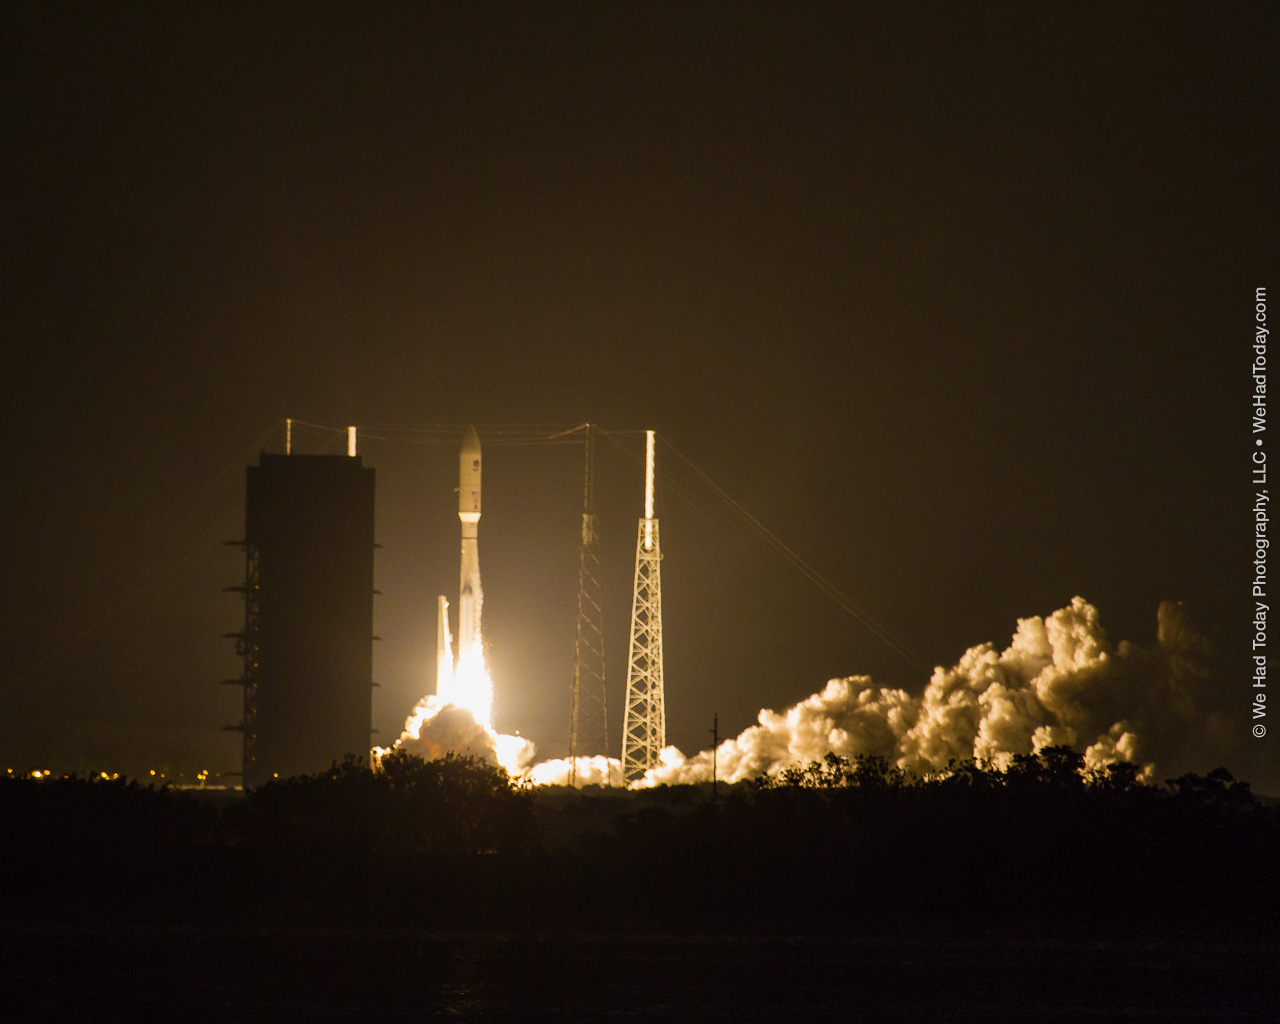 The Atlas V lifts off at 6:18am EDT on September 2, 2015